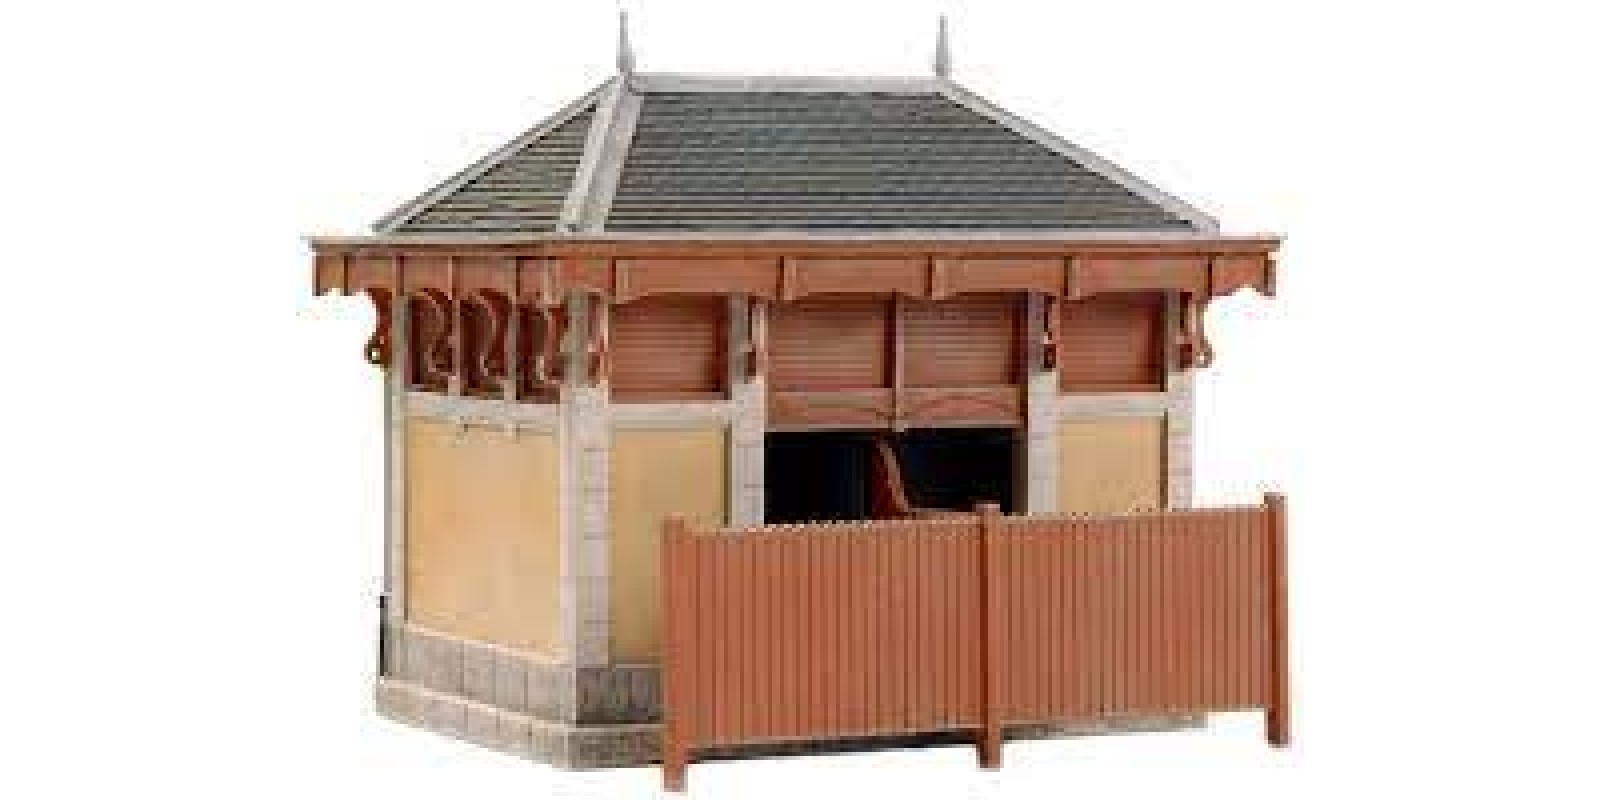 AR10.266 French toilet and equipment building, 1:87, resin kit, unpainted